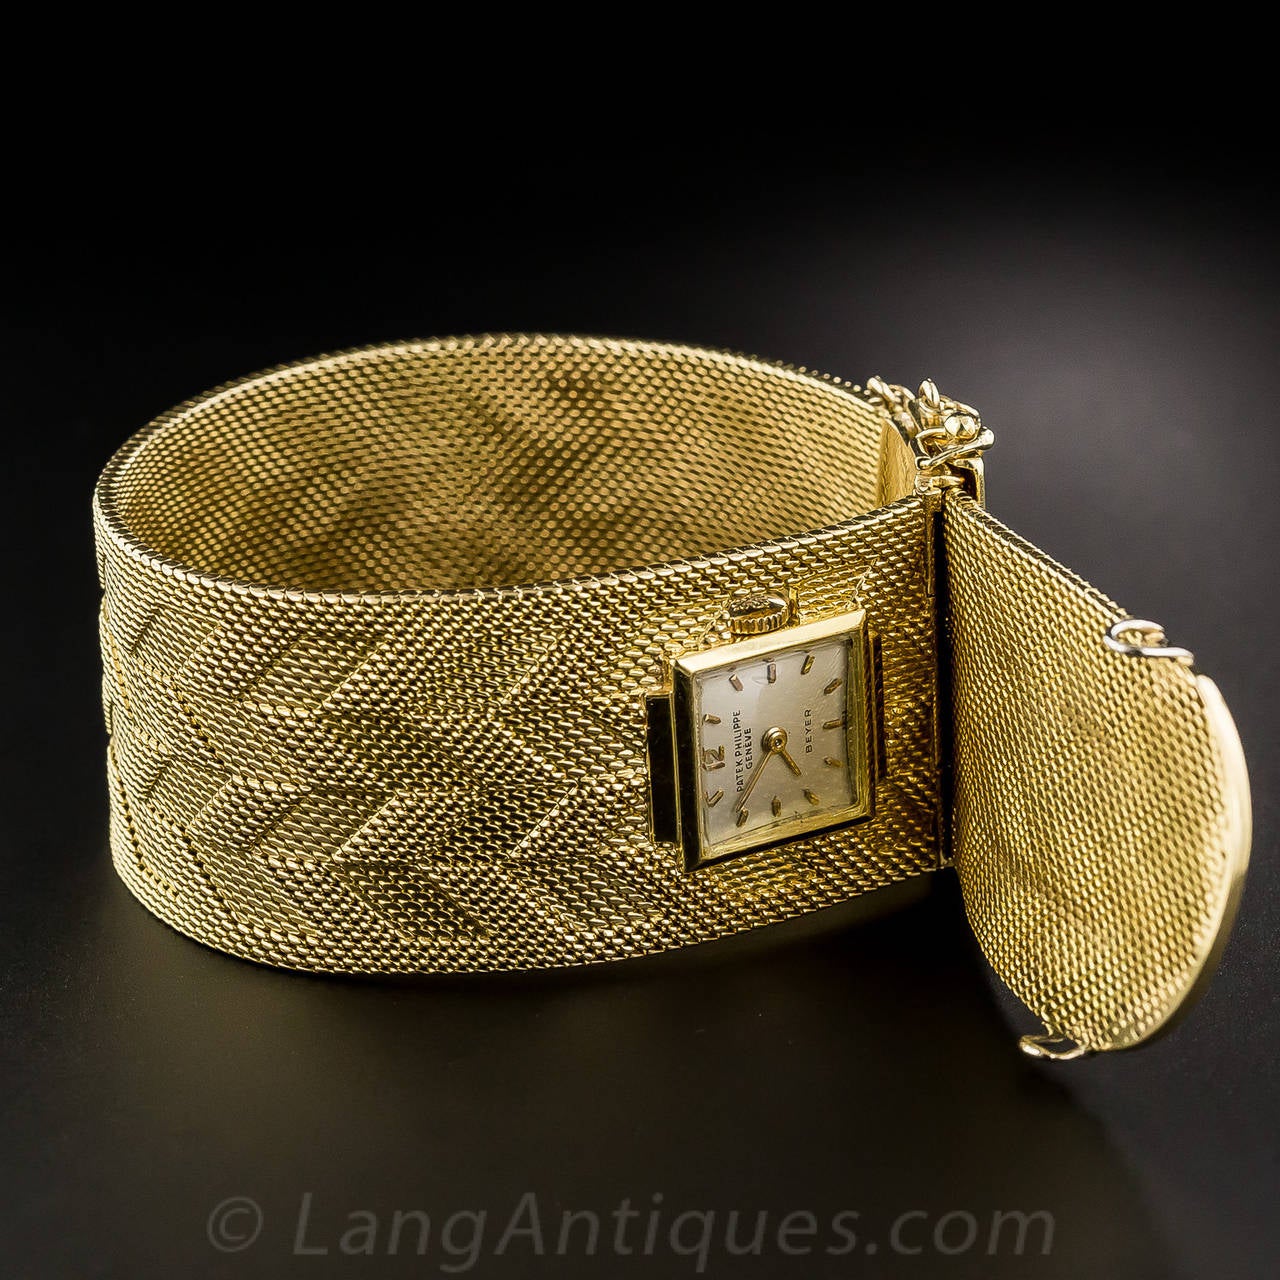 There's a hidden surprise waiting for you in this lavish 1 inch + wide 18K gold bracelet - a timepiece by none other than the world's most celebrated watchmaker - Patek Phillipe of Geneva, Switzerland. The weighty, yet lithe and supple, mesh